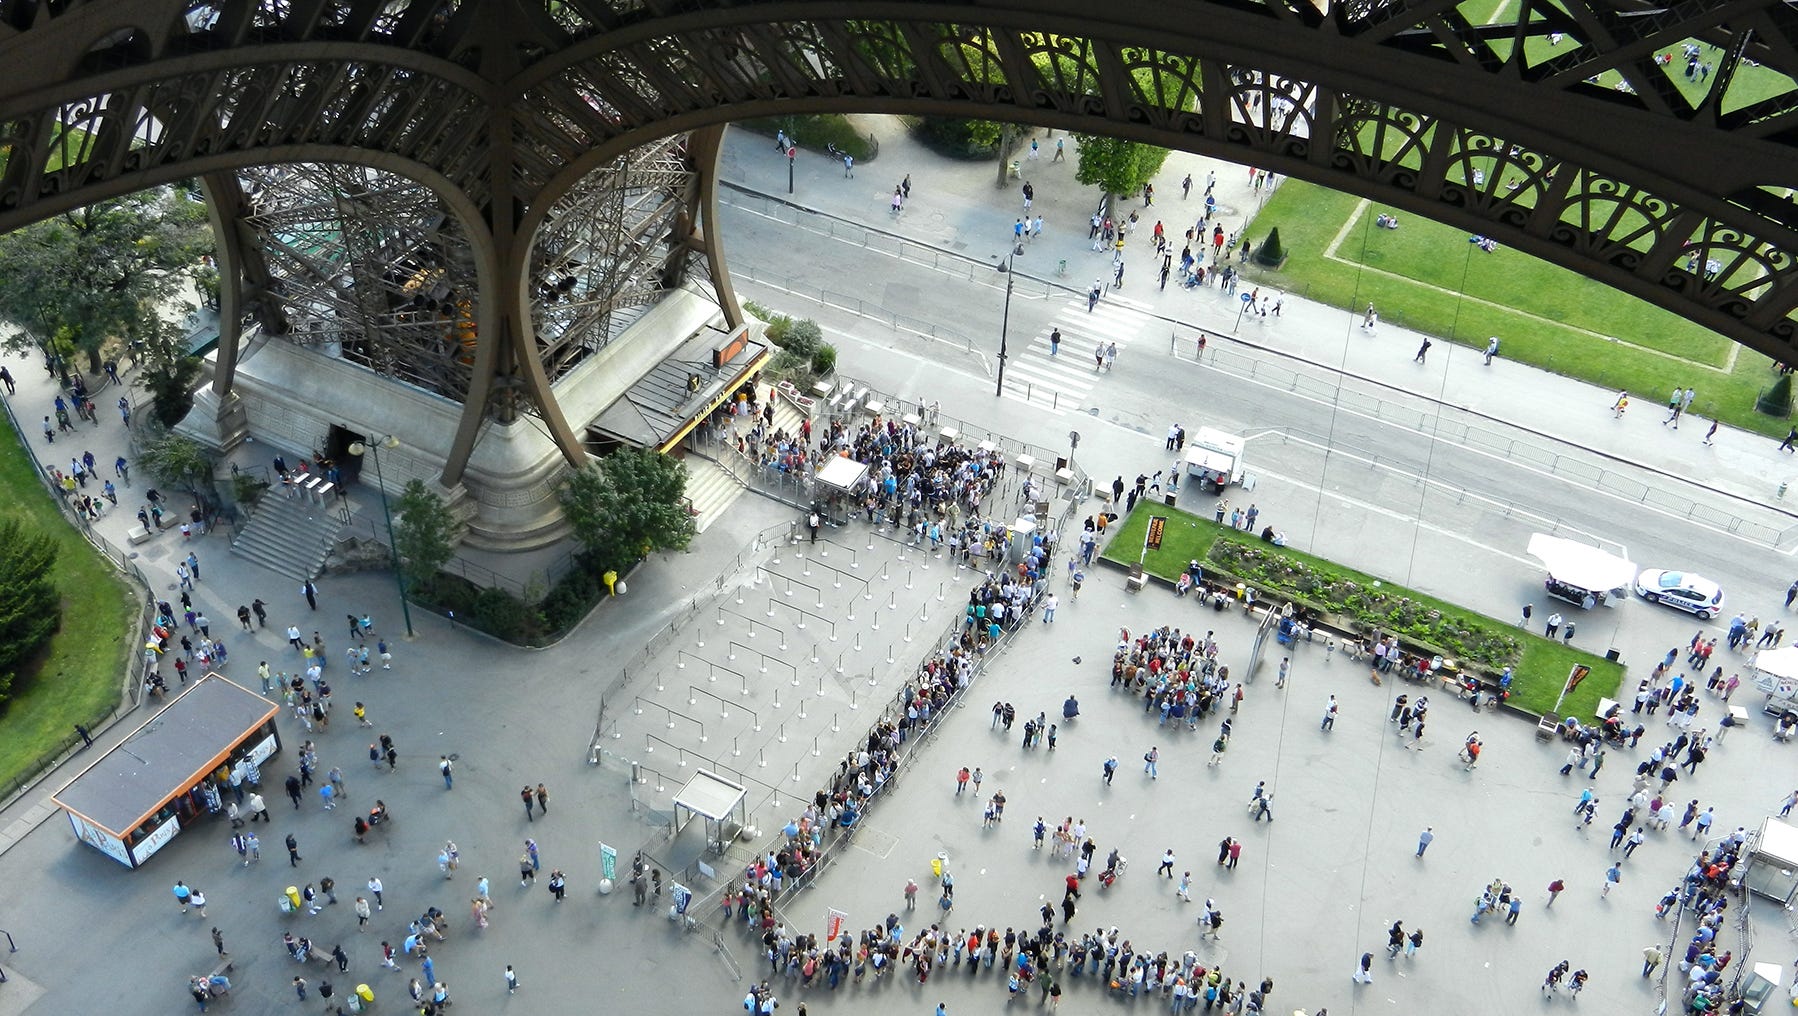 Eiffel Tower: Rick Steves' tips for your visit